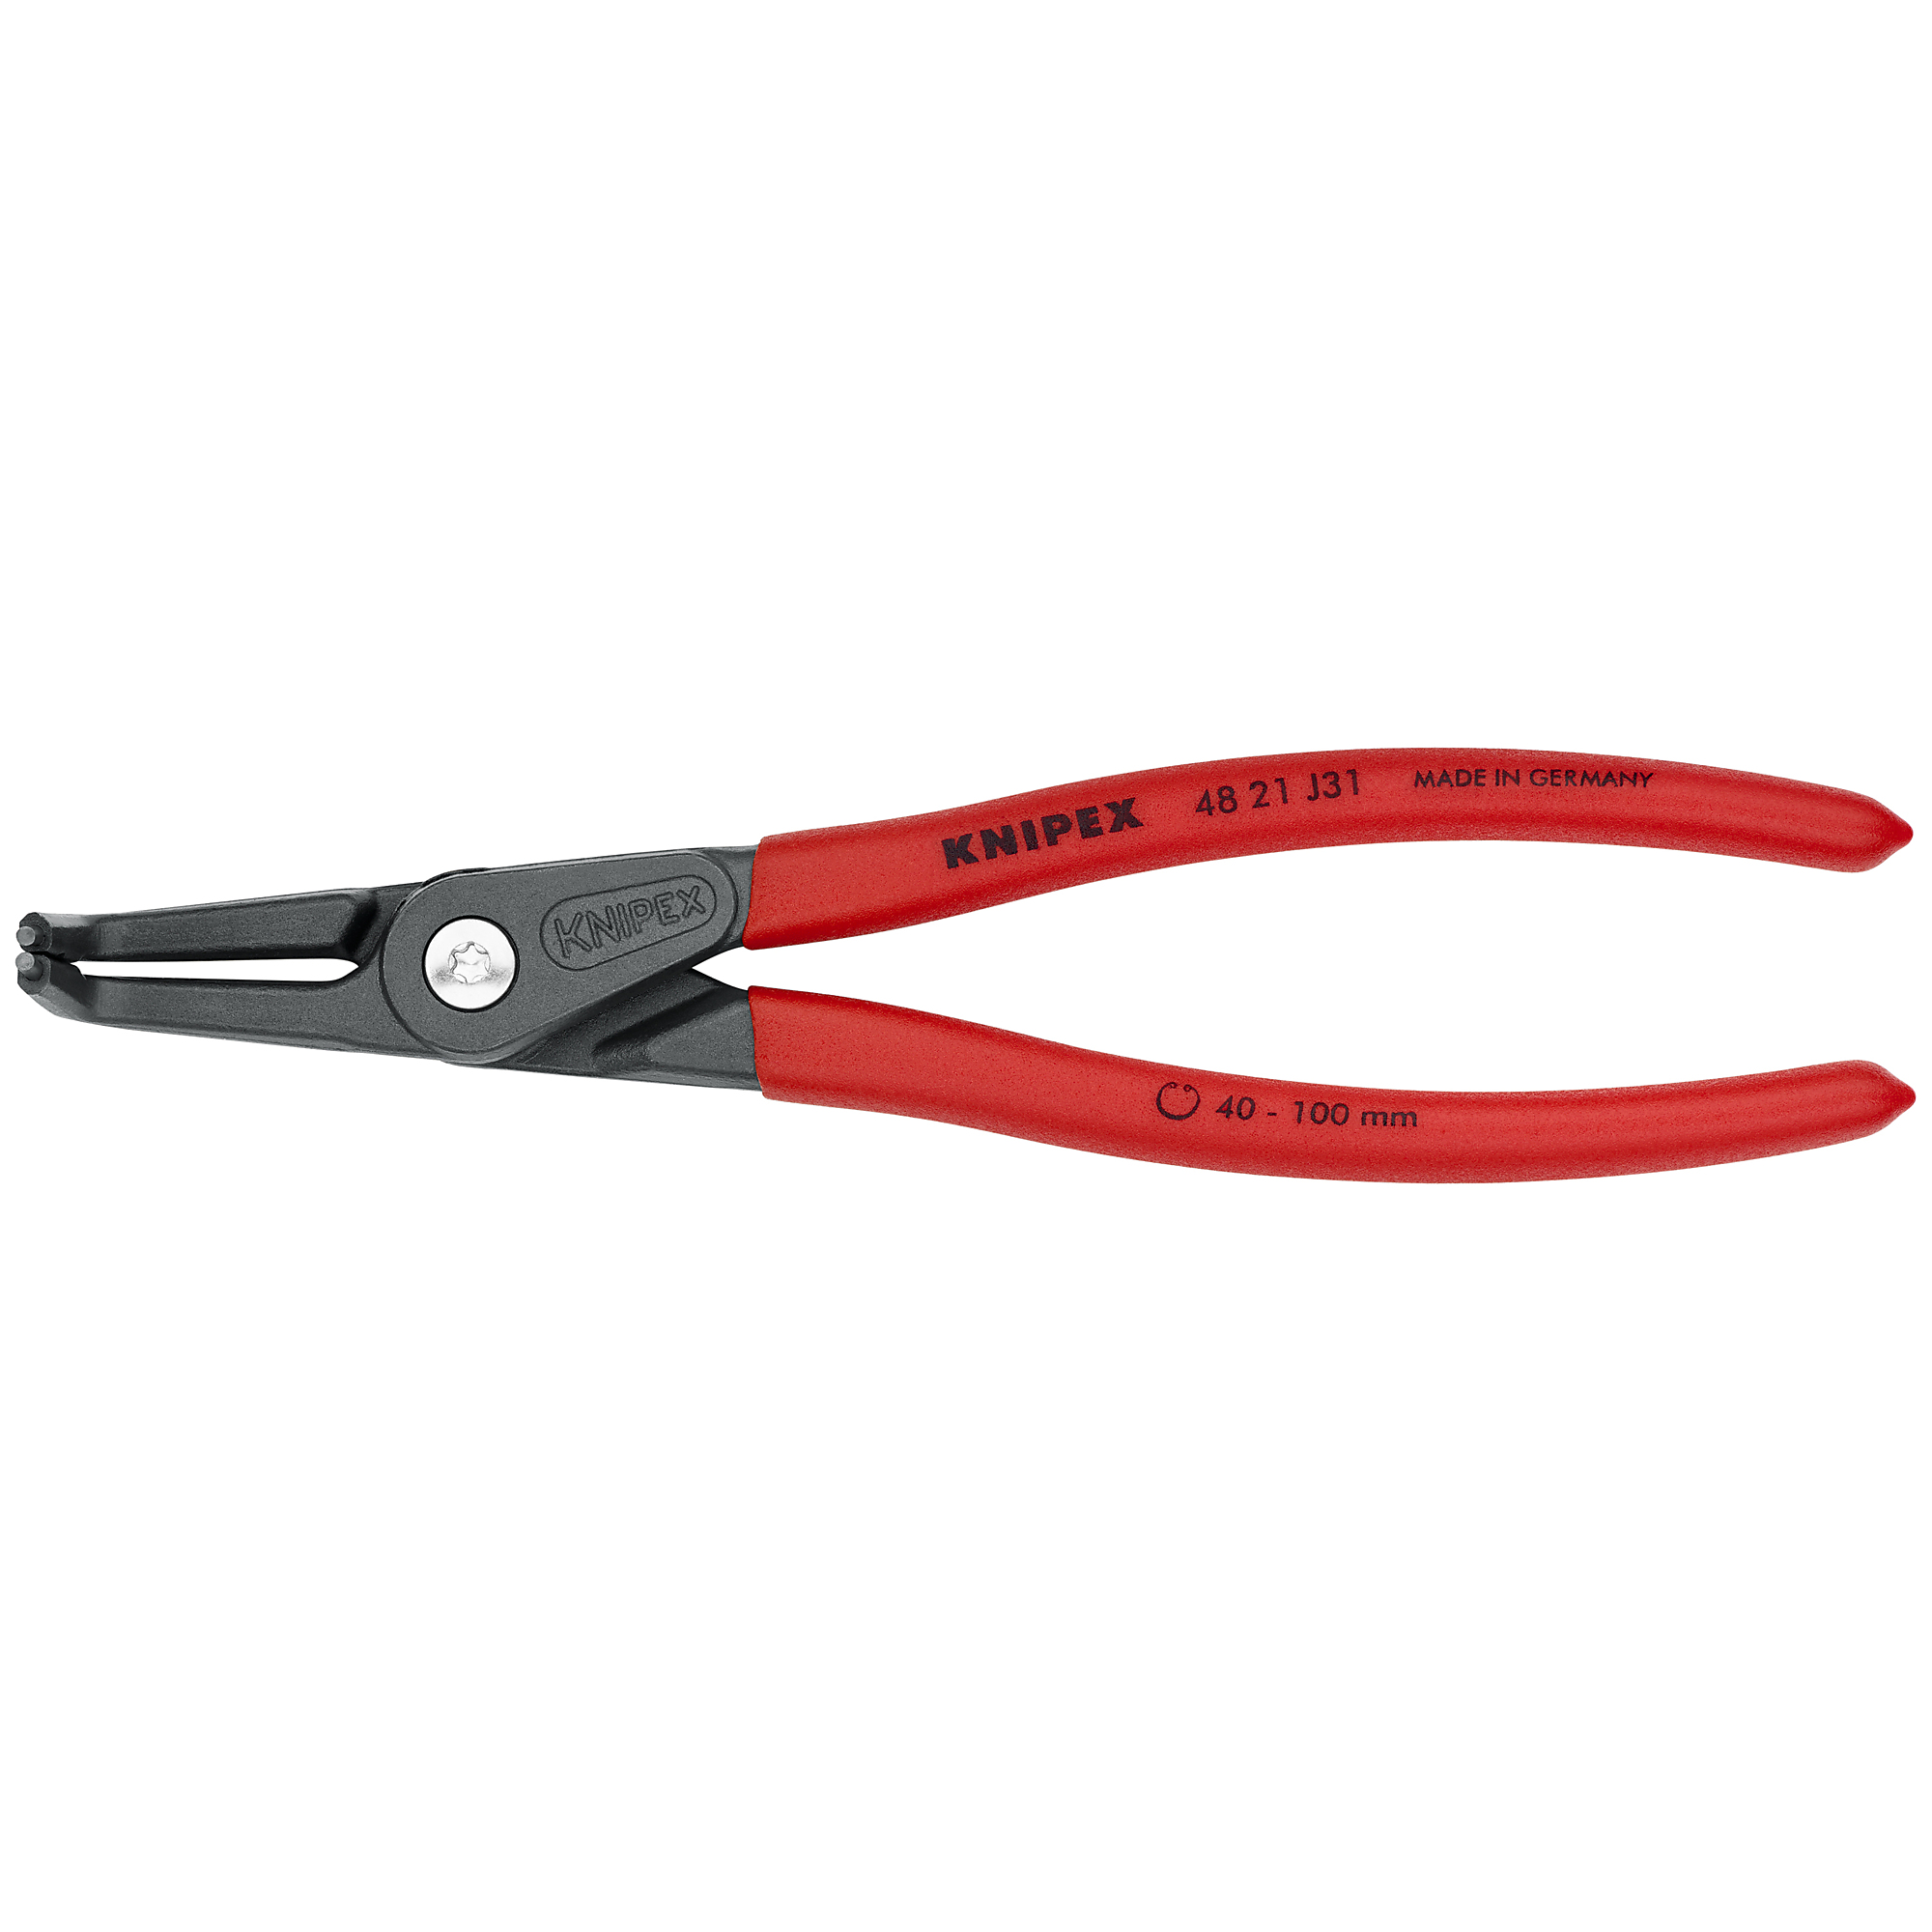 KNIPEX, Int 90Â° Prec. Snap Ring Pliers, 3/32 tip, 8.25Inch, Pieces (qty.) 1 Material Steel, Model 48 21 J31